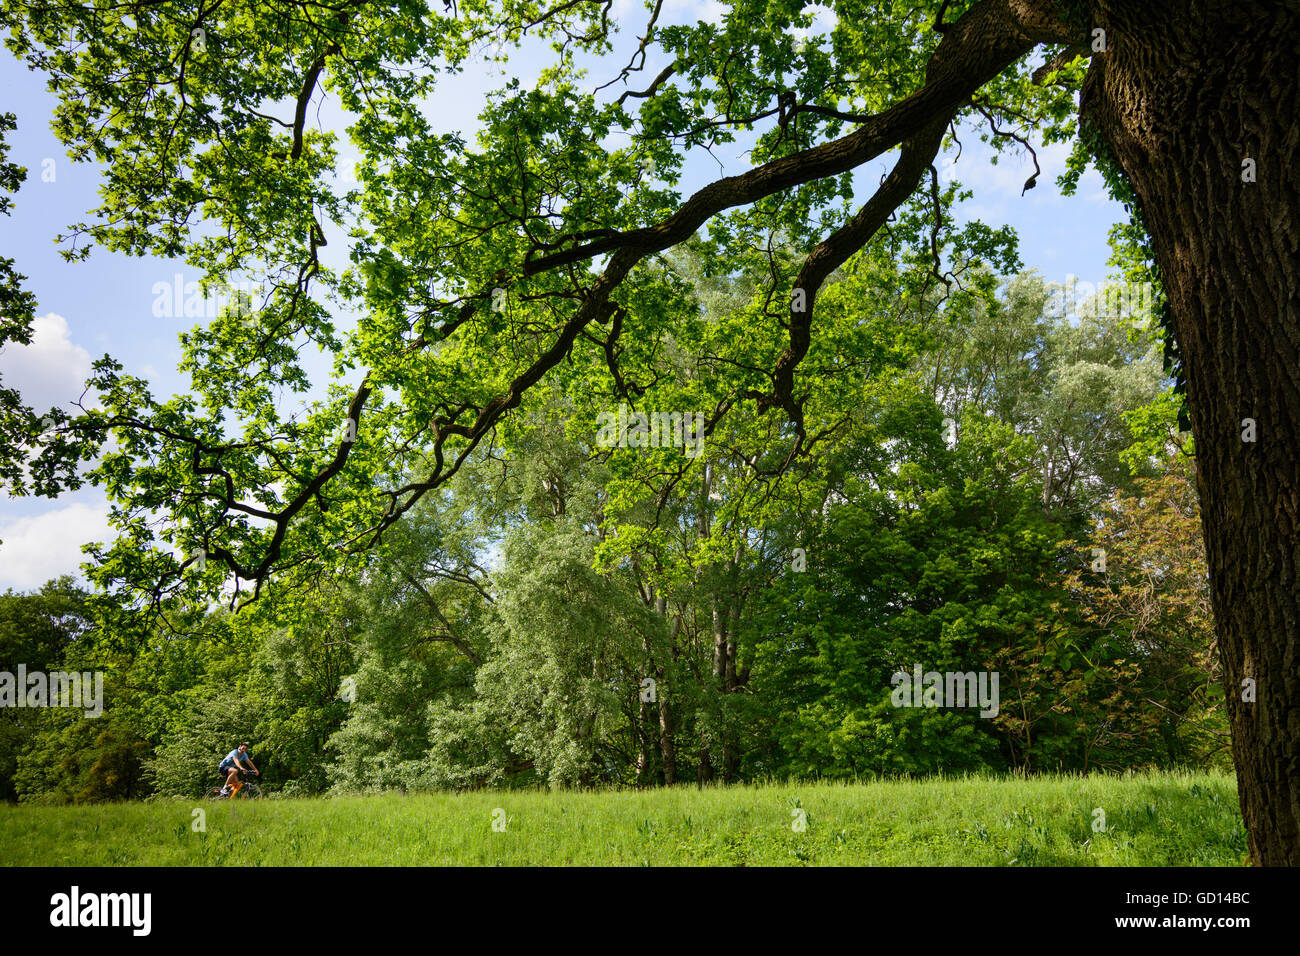 Nationalpark Donauauen, Danube-Auen National Park: Cyclists on the Marchfeld dam the Danube cycle path and common oak ( Quercus Stock Photo